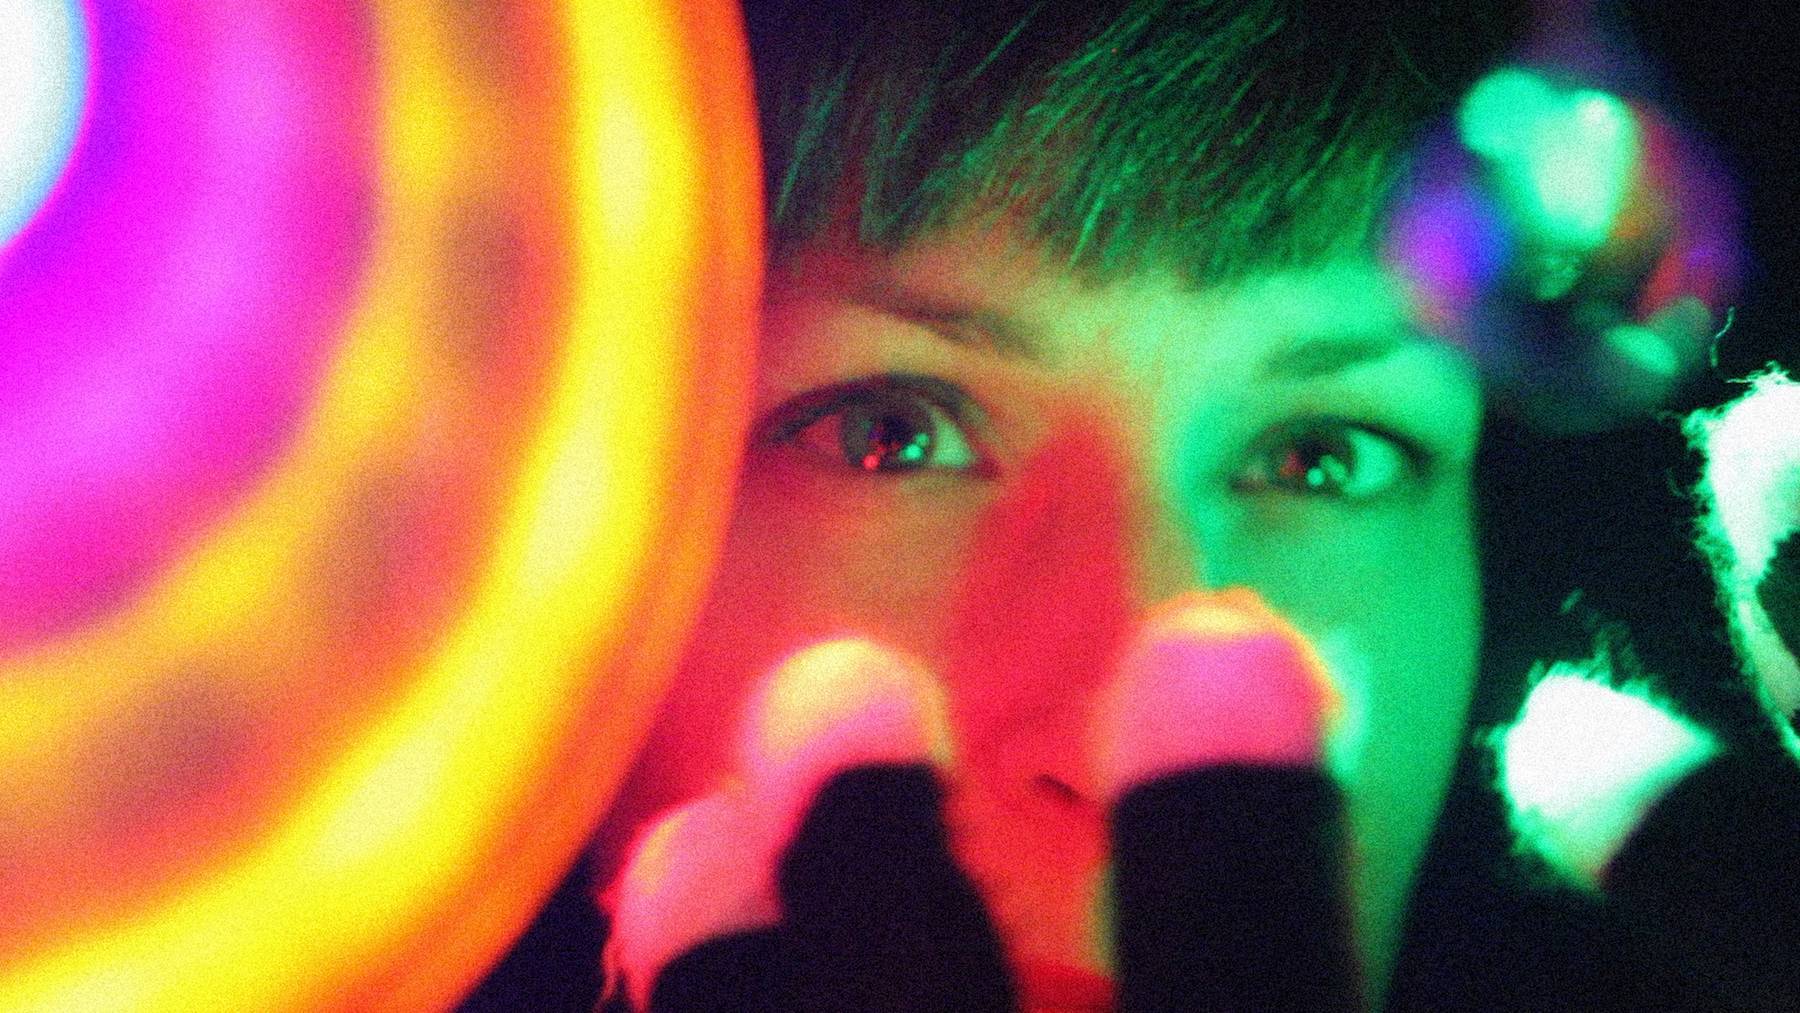 Close up on a young person face with an ethereal cast of rainbow colors.